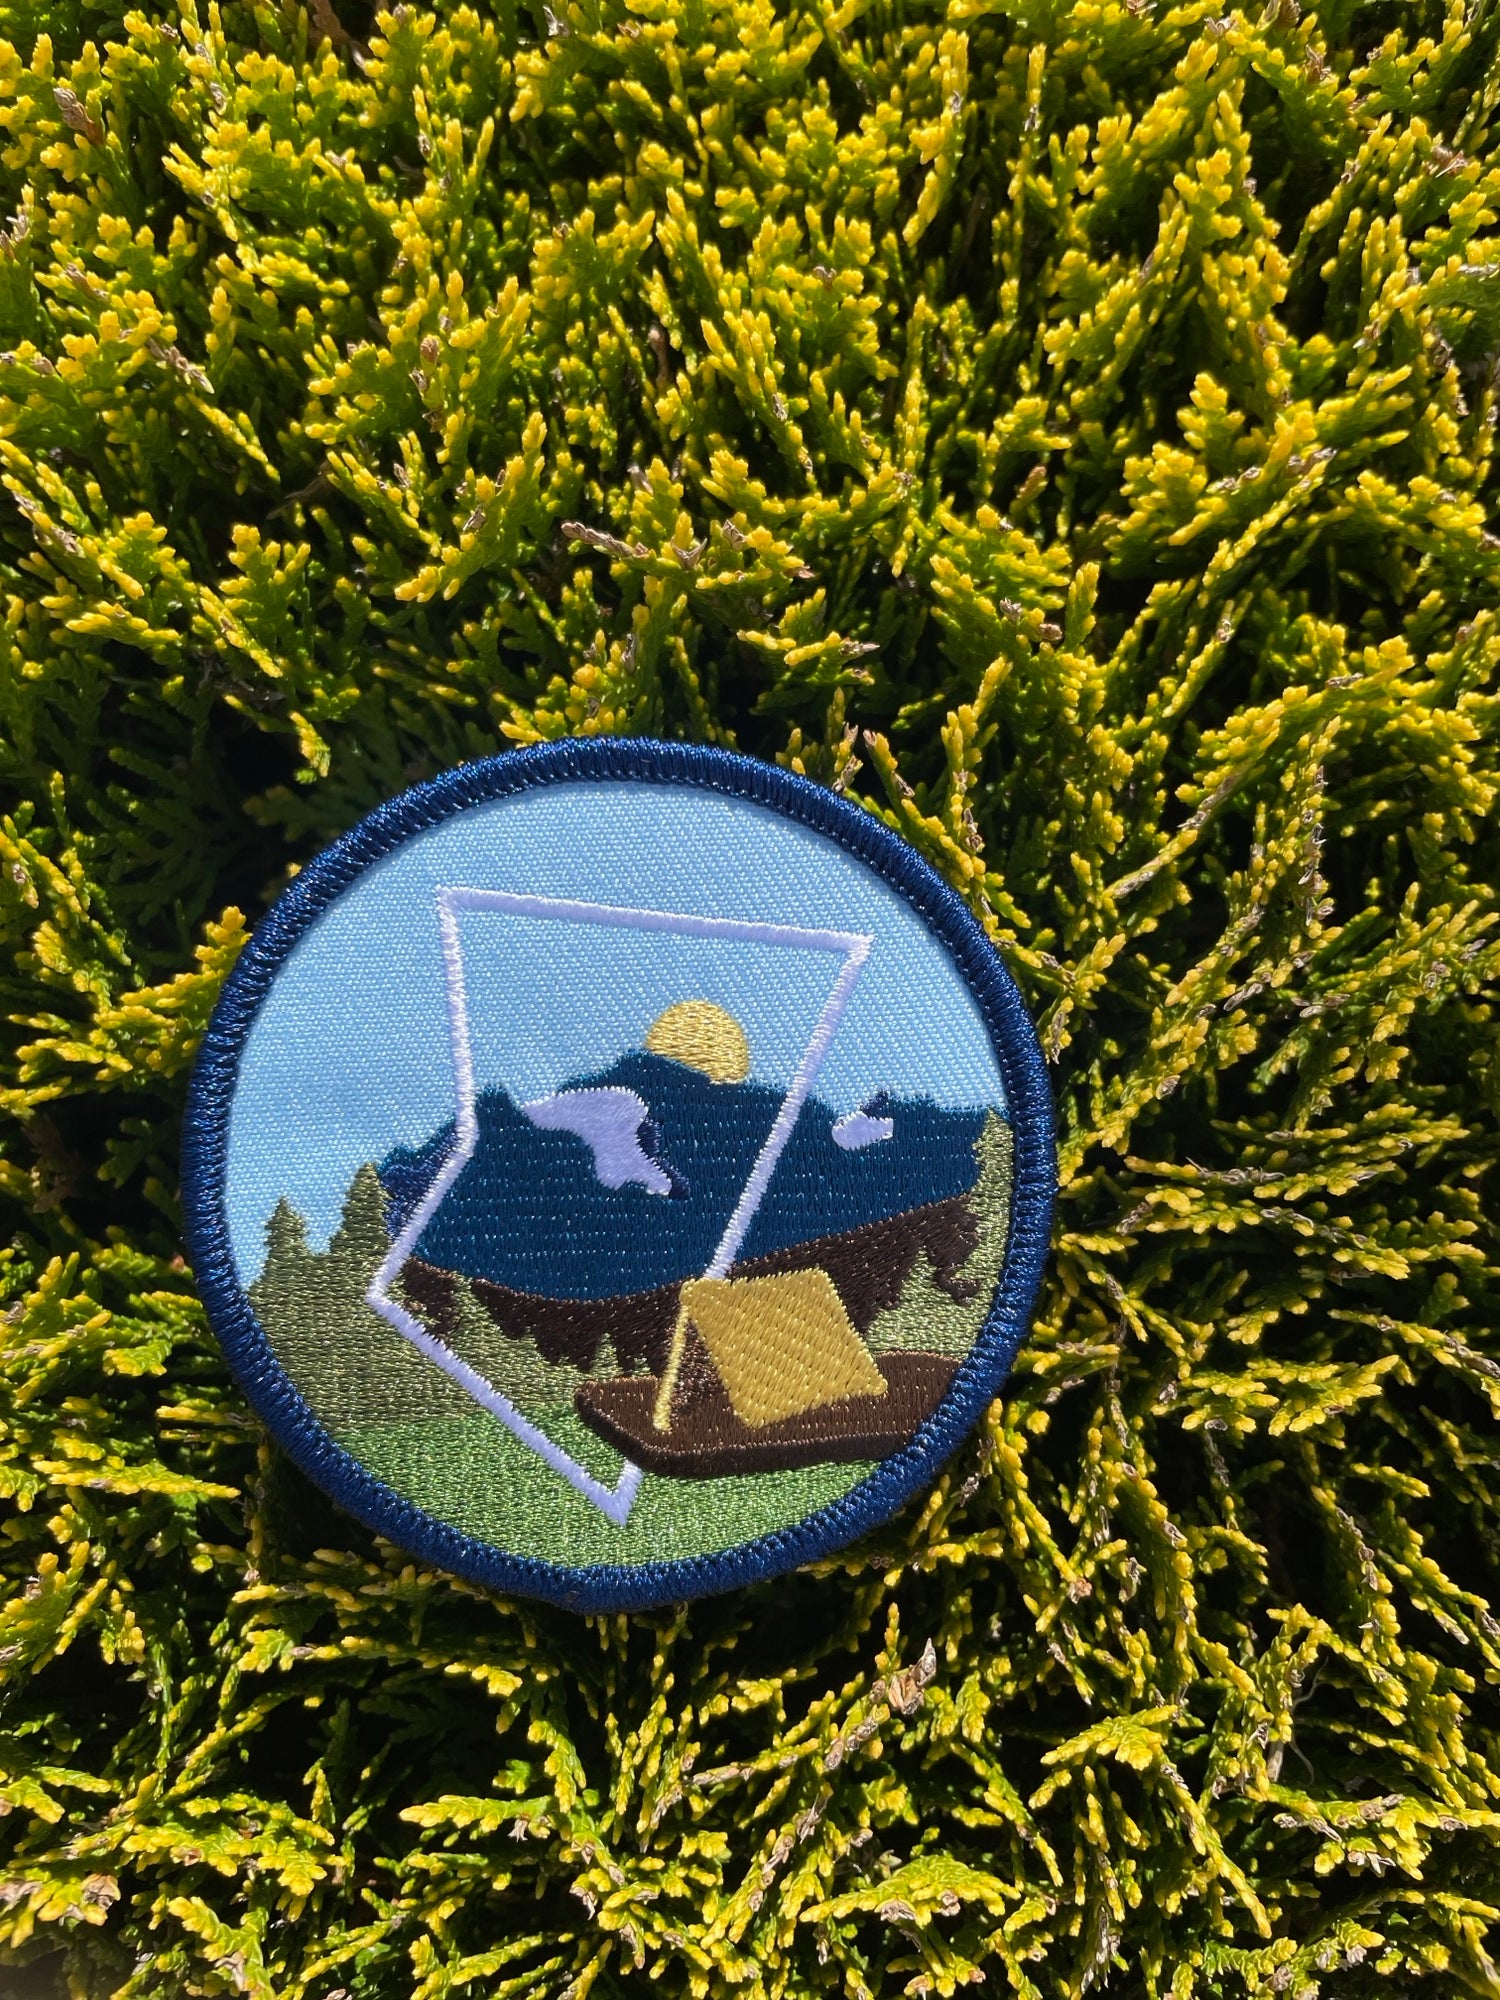 Camping Patch